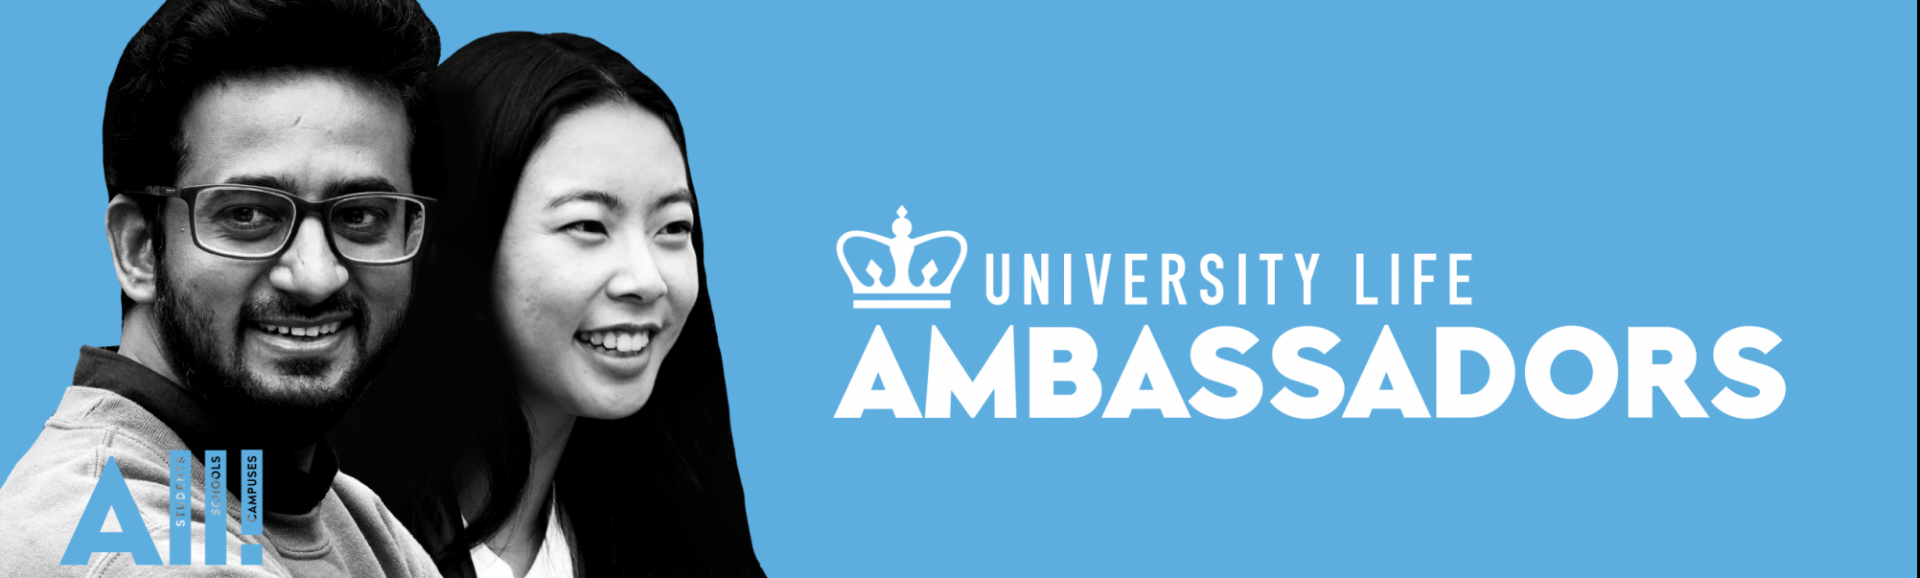 Two students in black and white on a blue background with the text "University Life Ambassadors"